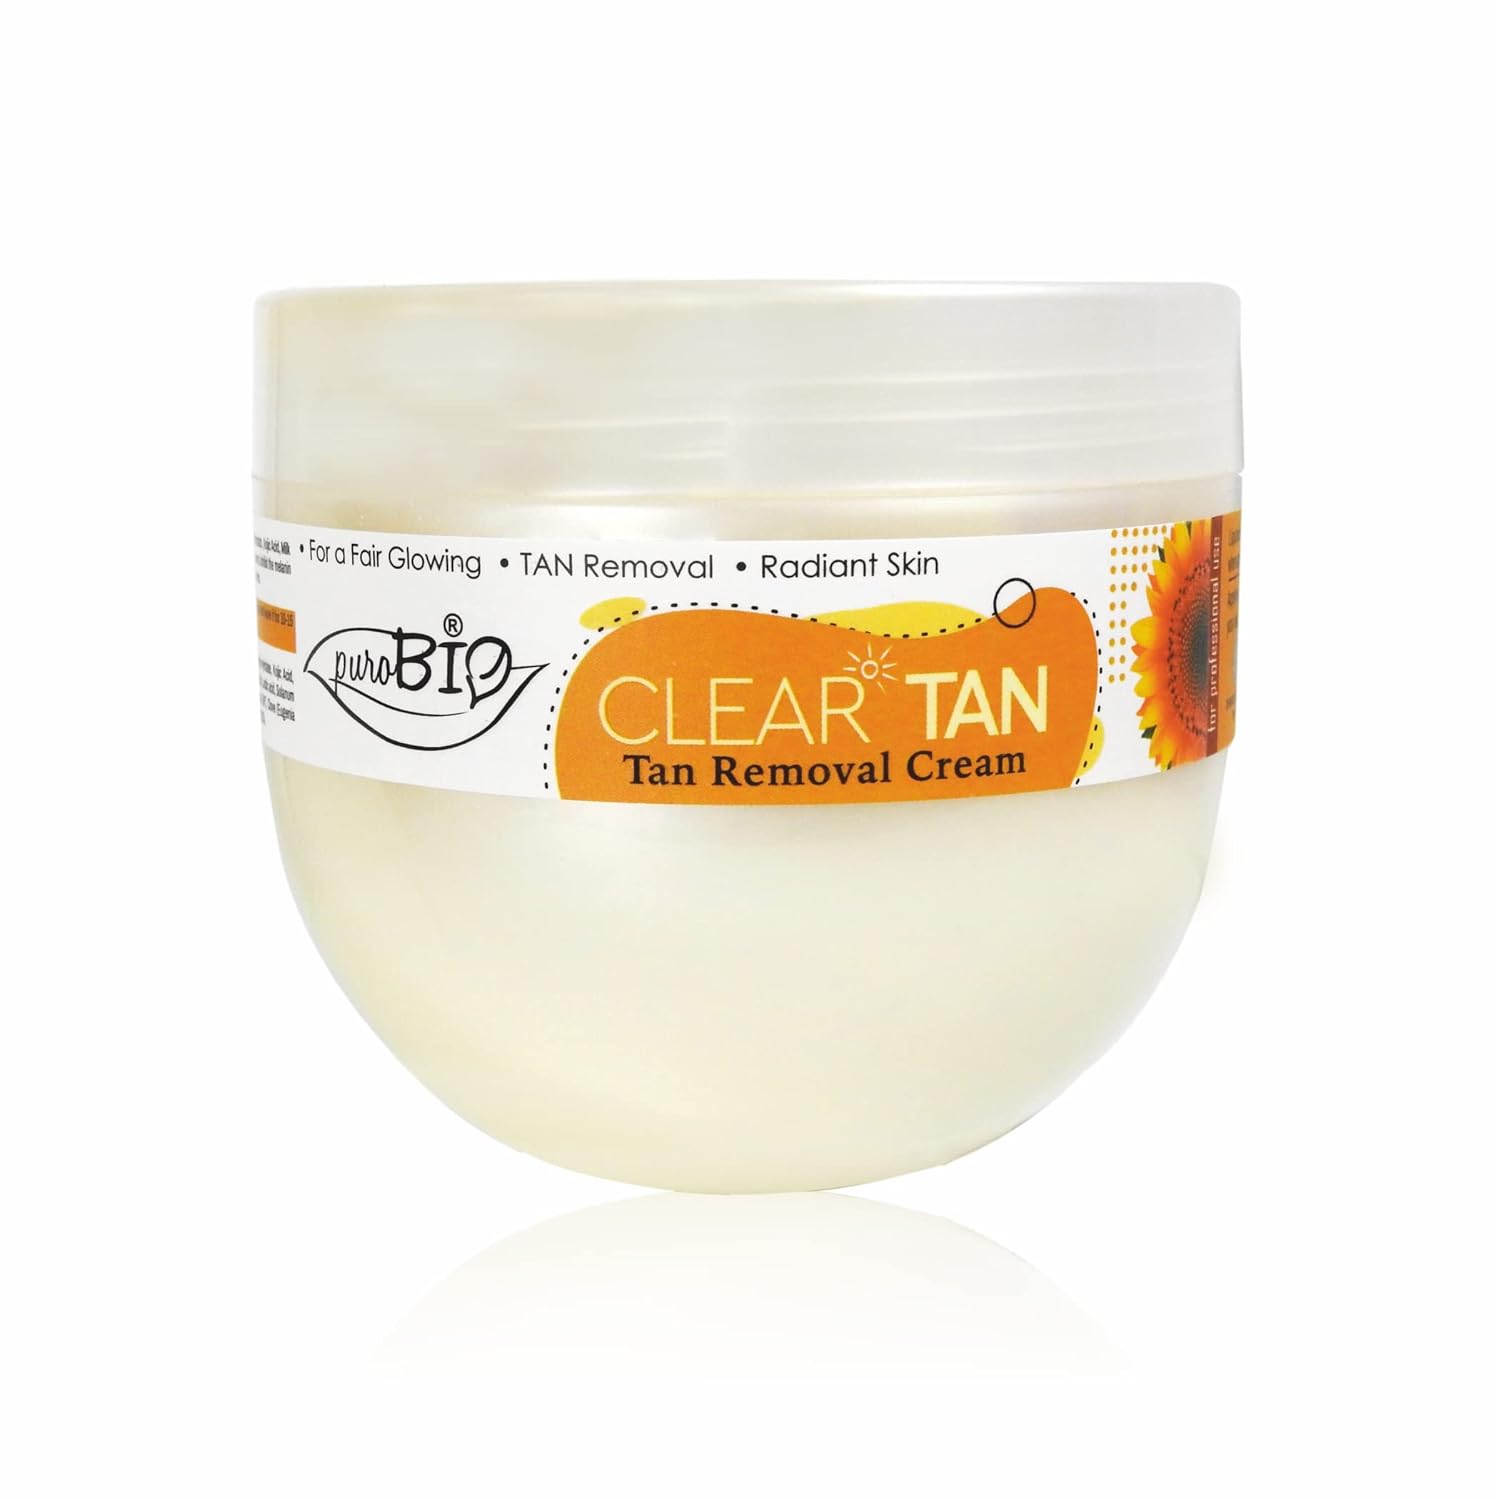 ClearTan Face Pack Best Tan removal Cream